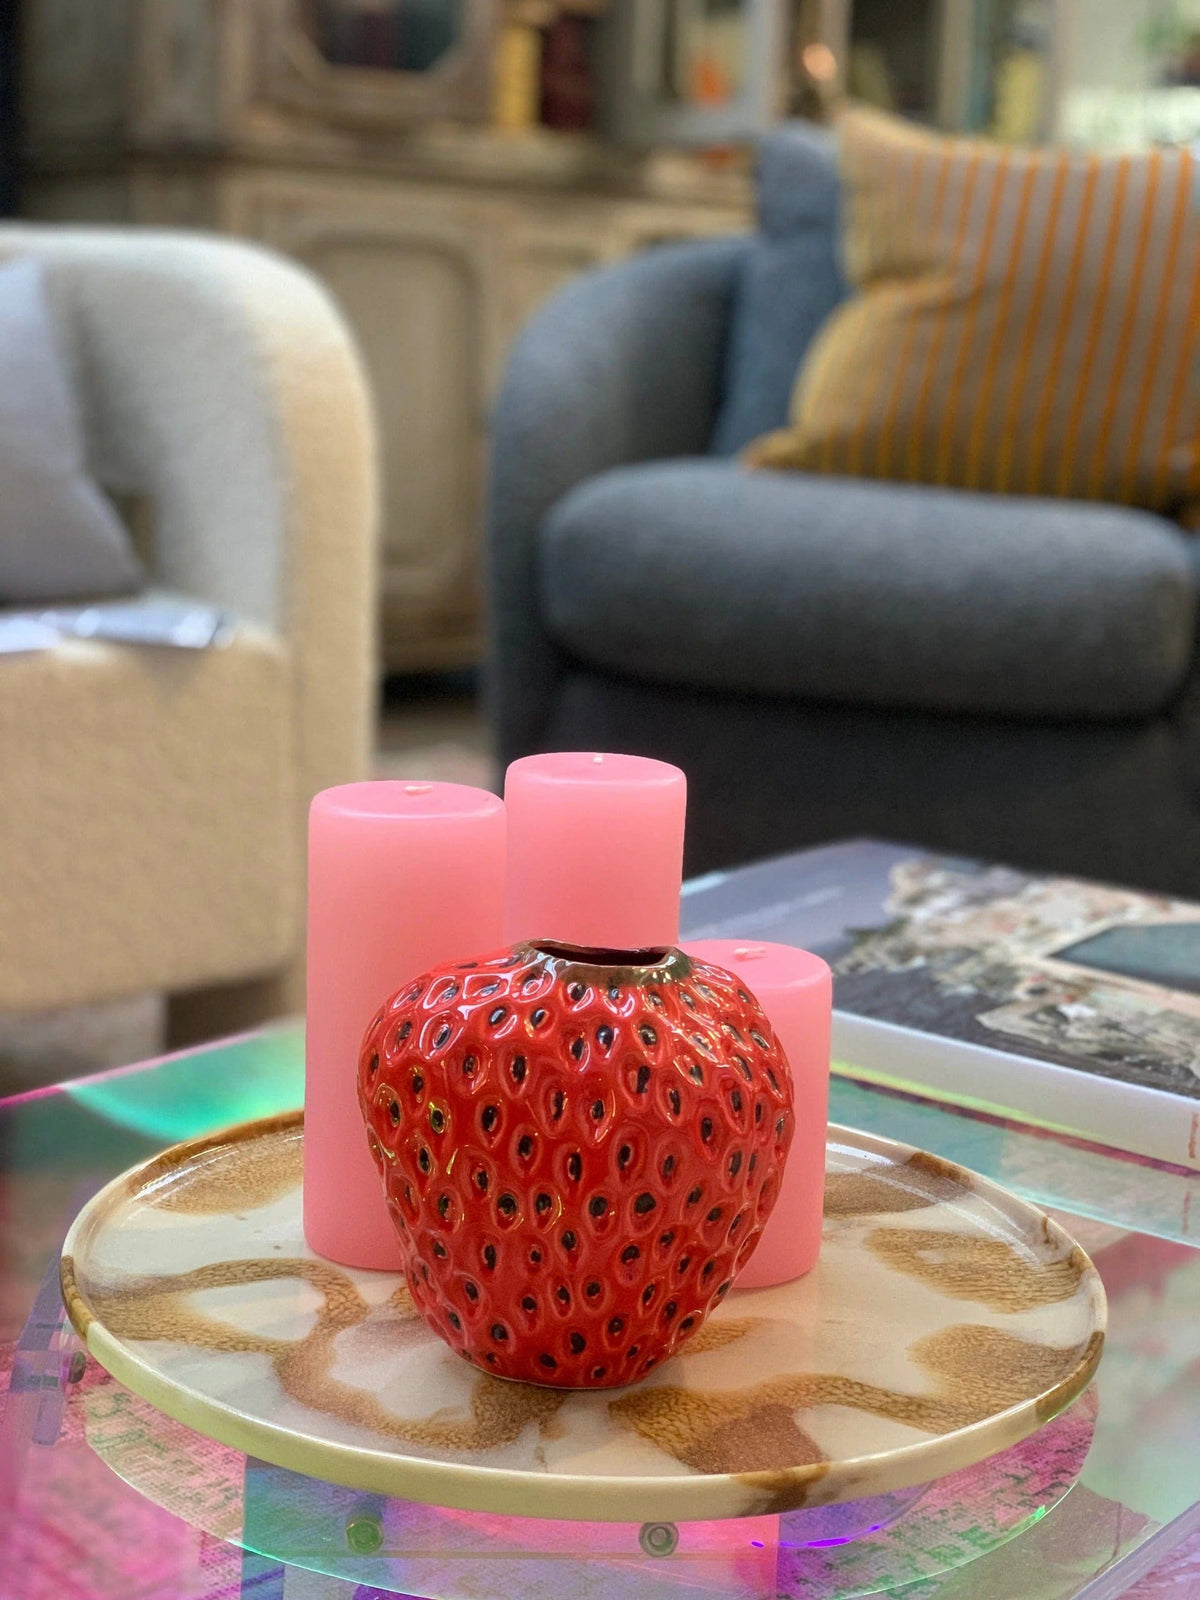 A 12cm strawberry vase on a coffee table